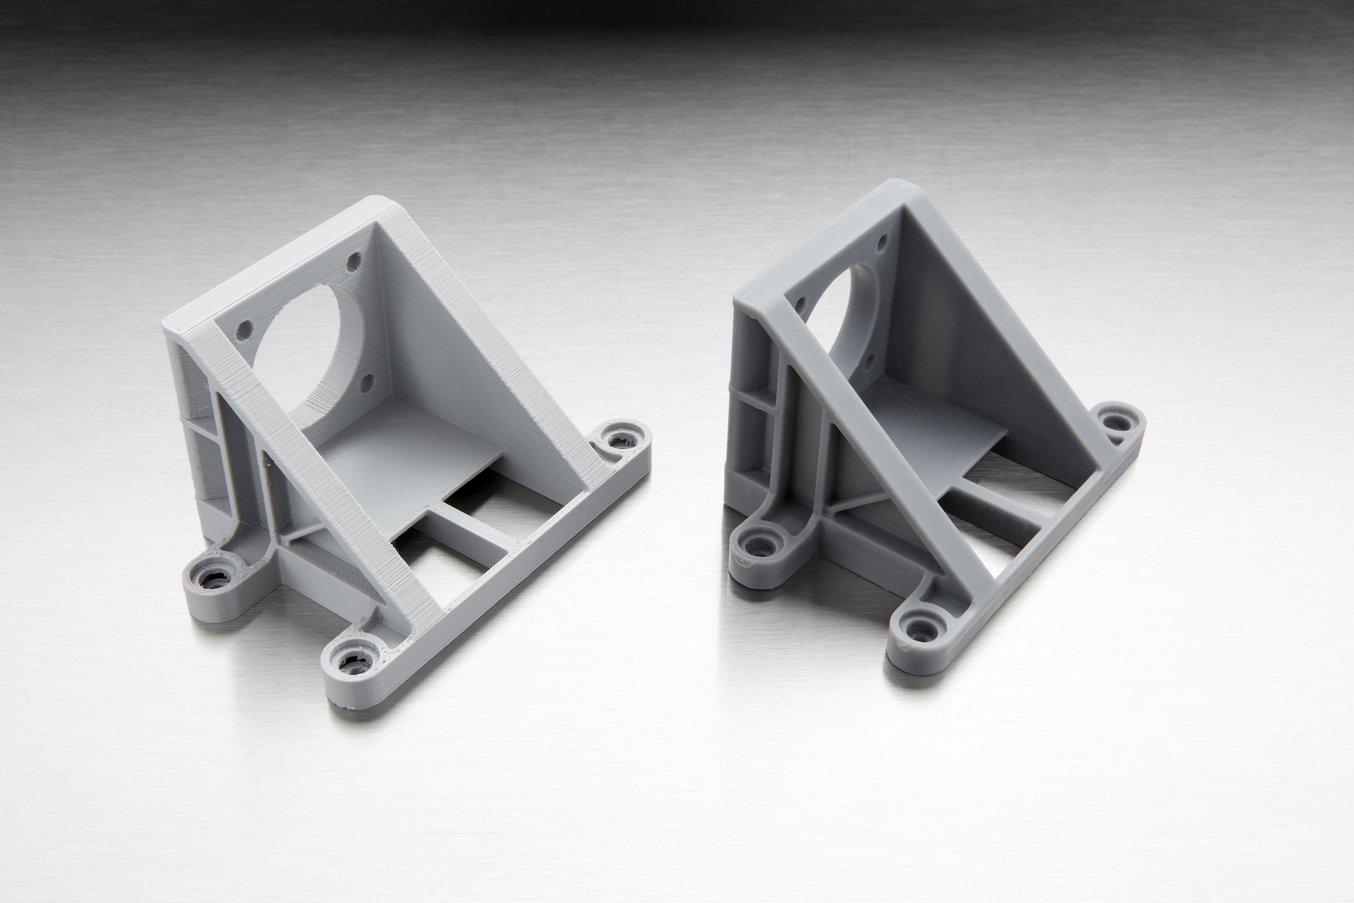 The difference in quality is less visible on relatively simple parts. However, SLA parts are dense and isotropic, which makes them better suited for many engineering and manufacturing applications (FDM part on the left, SLA part on the right).